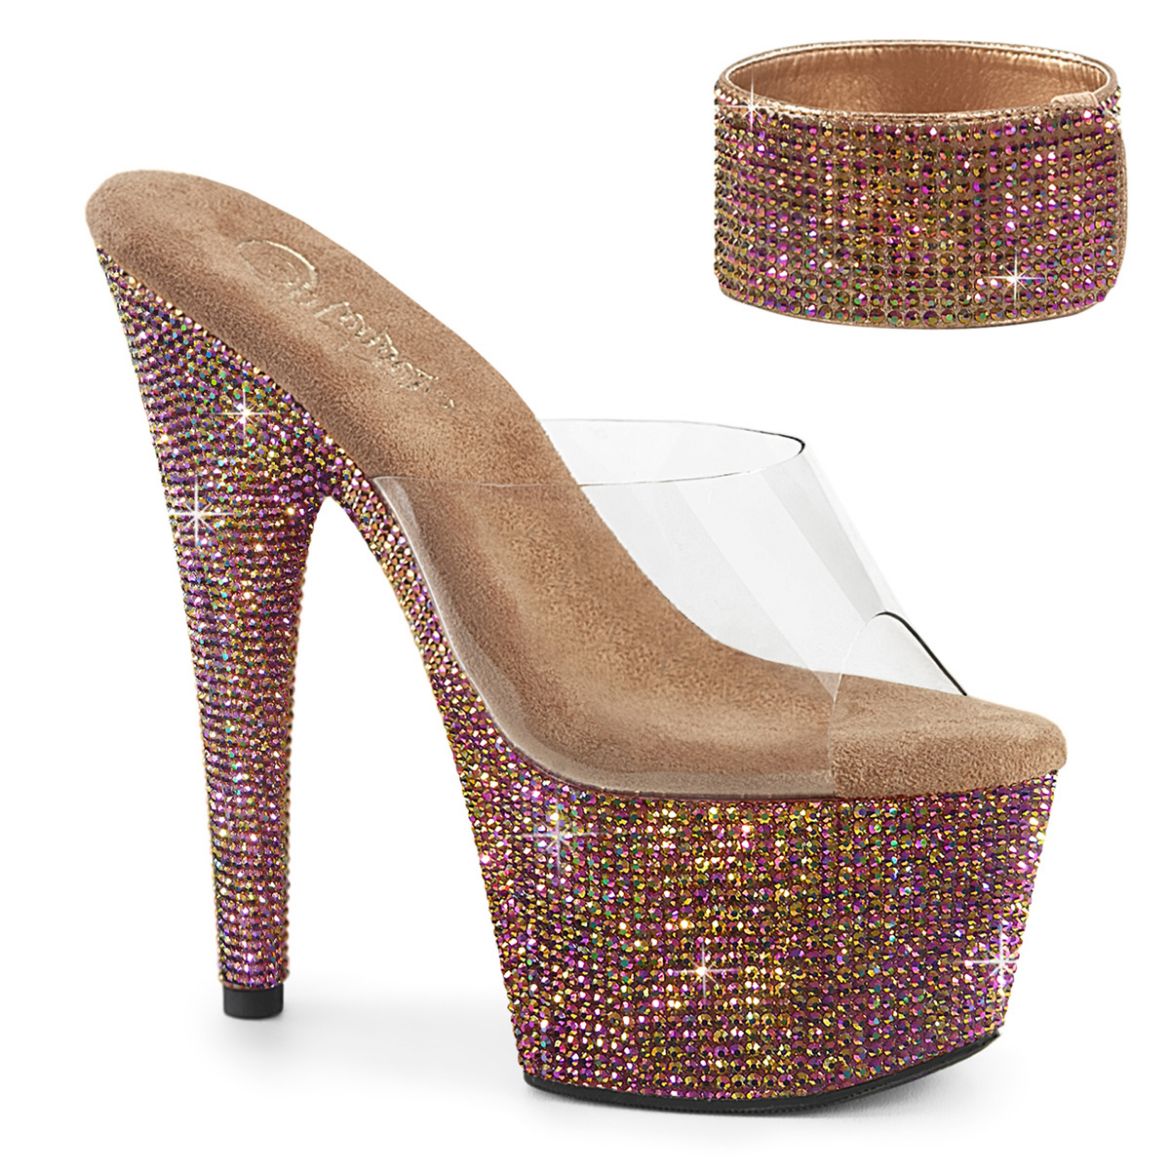 Product image of Pleaser BEJEWELED-712RS Clr/Bronze Multi RS 7 Inch Heel 2 3/4 Inch PF RS Embellished Slide w/Matching Cuff